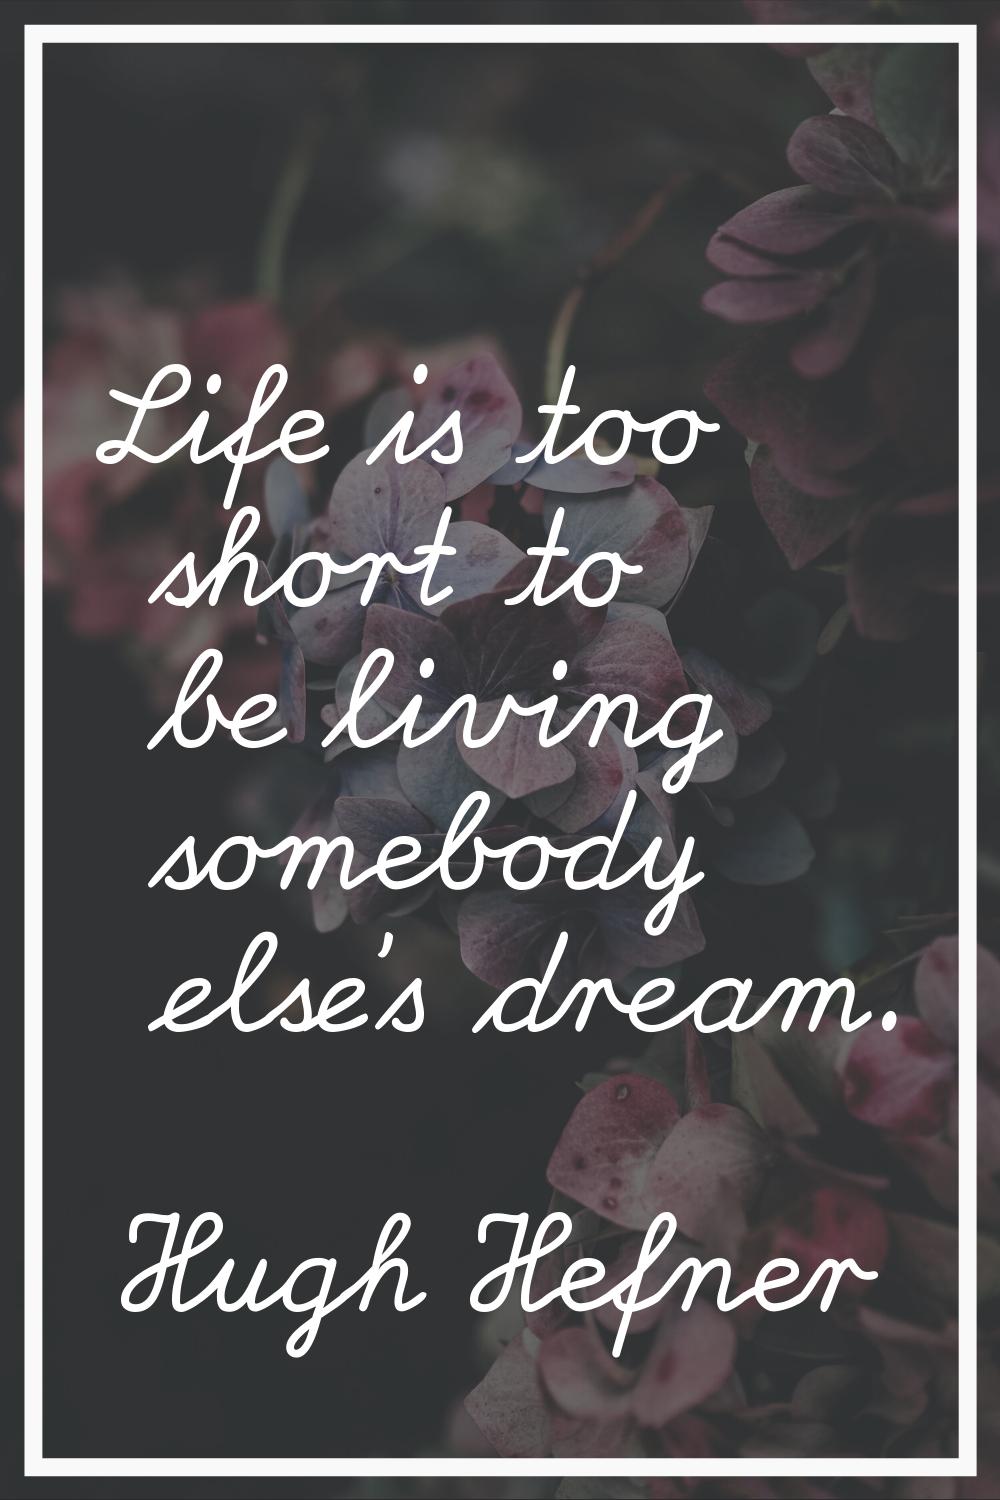 Life is too short to be living somebody else's dream.